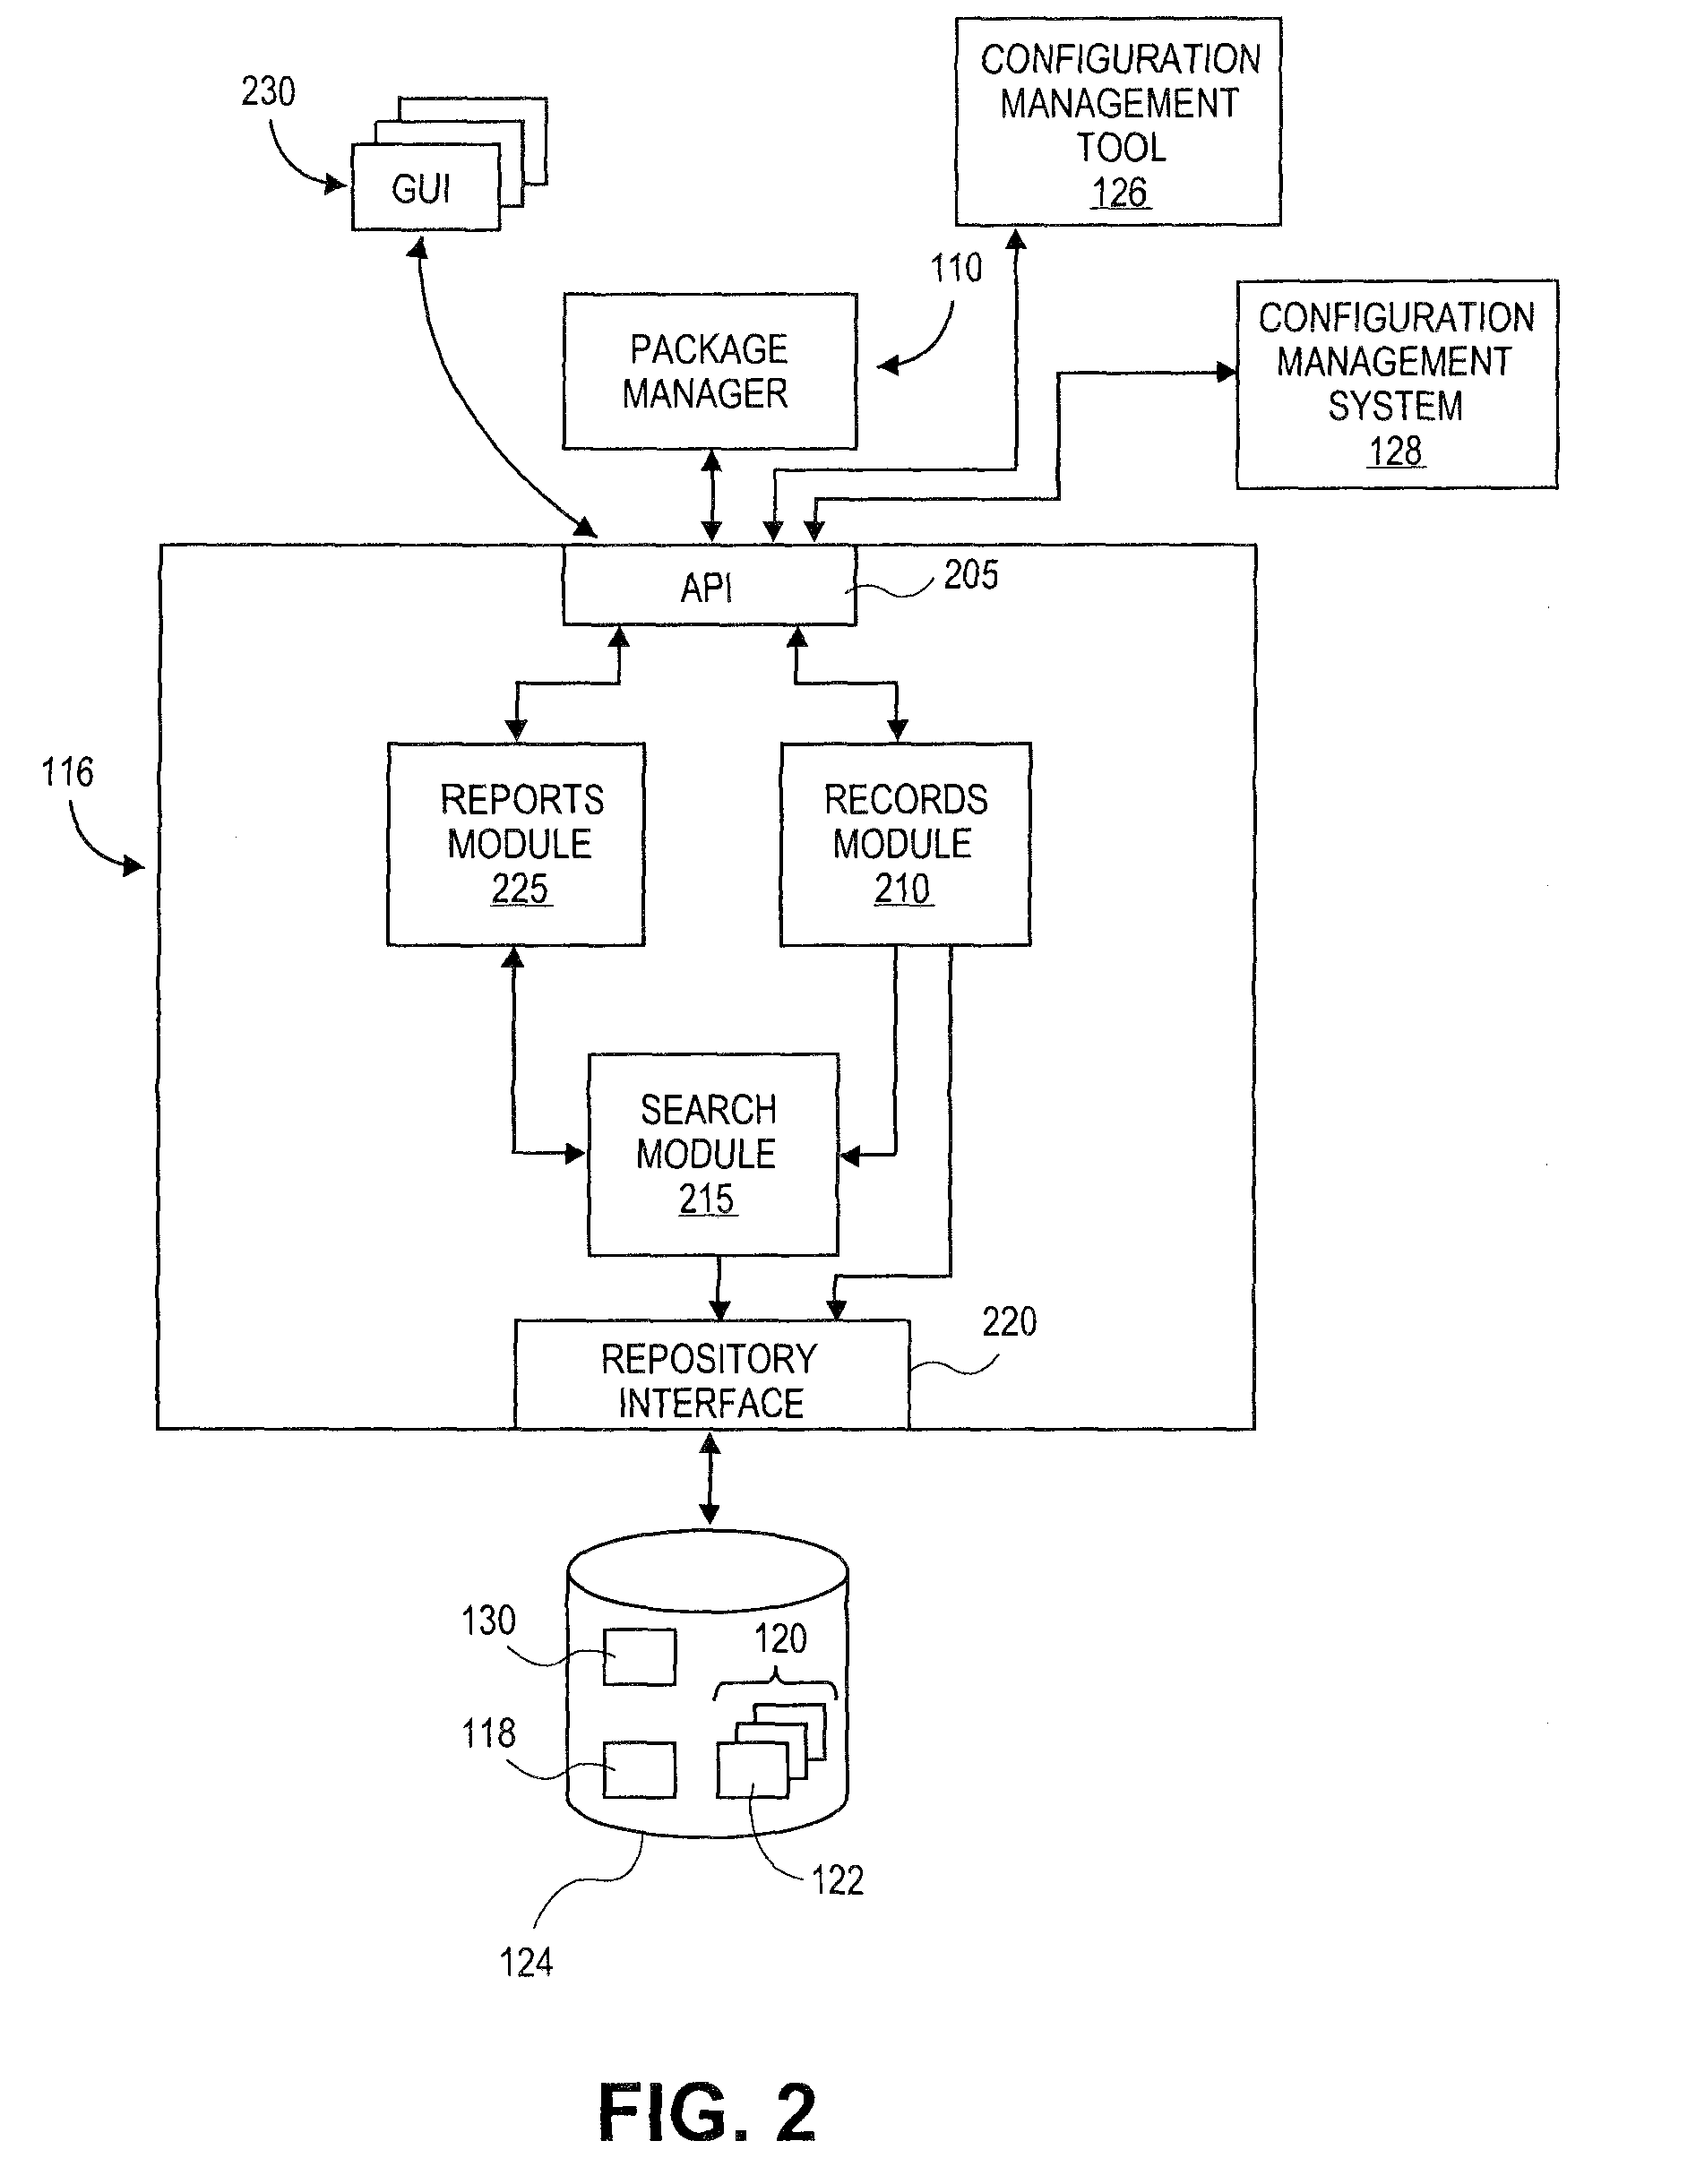 Systems and methods for tracking a history of changes associated with software packages and configuration management in a computing system